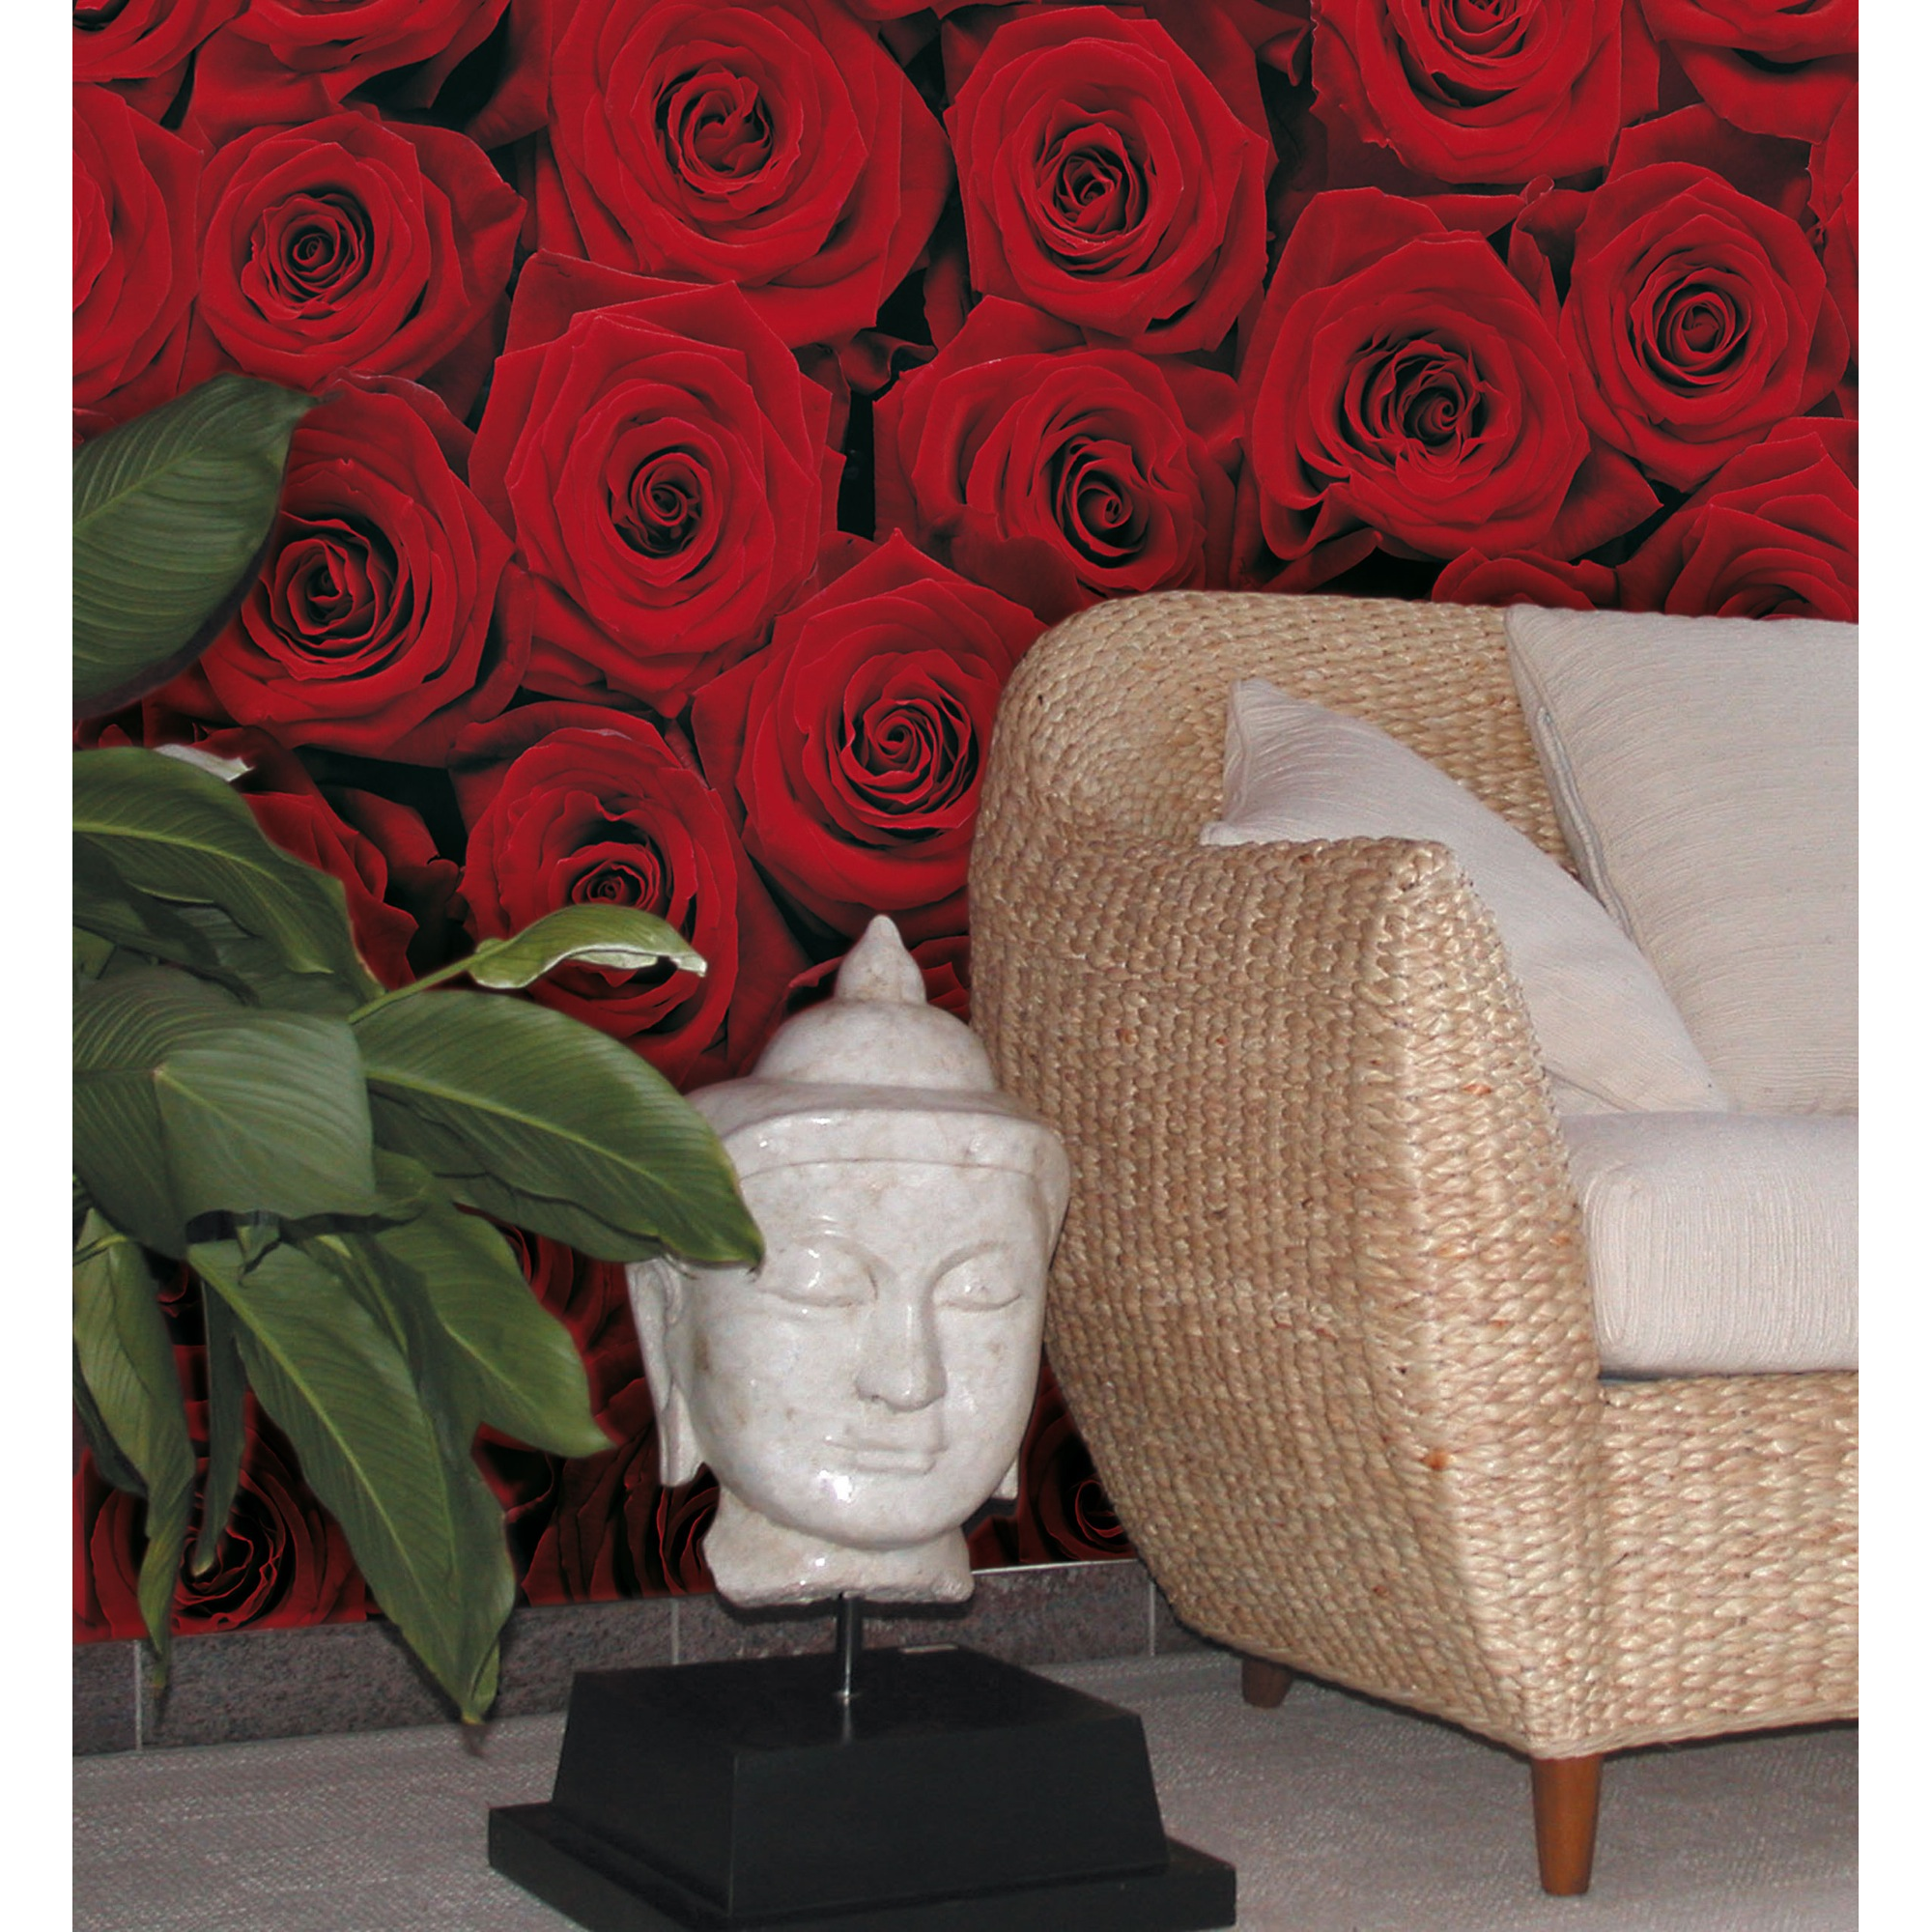 Fototapete 'Roses' 194 x 270 cm + product picture